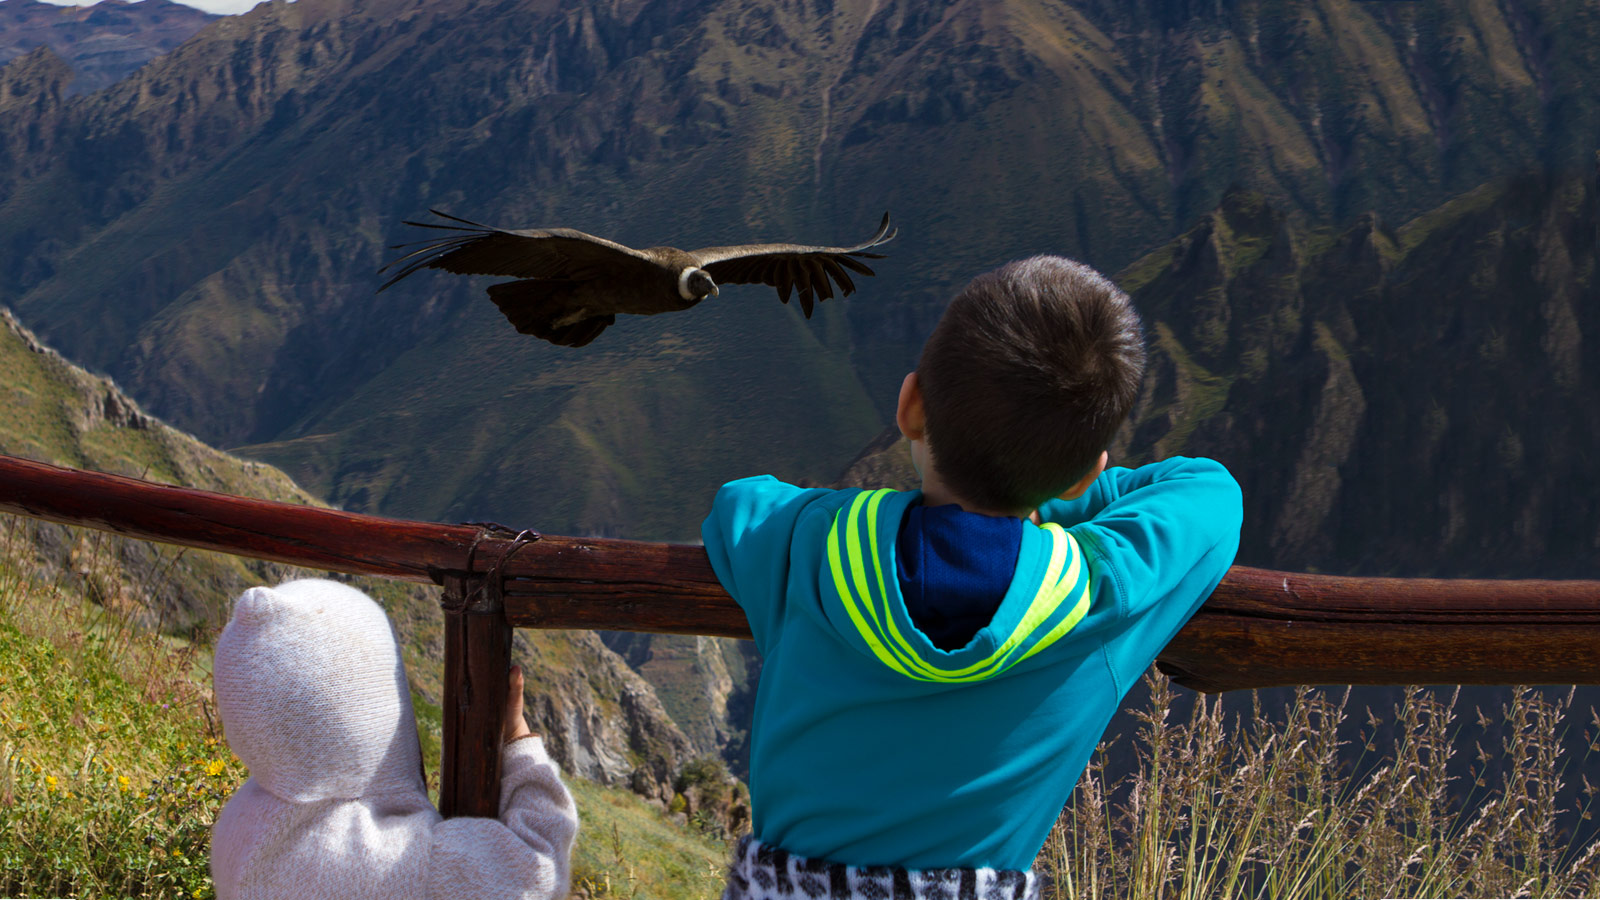 Two young Wandering Wagars boys watch an Andean Condor fly by from a viewpoint in Colca Canyon with kids in Peru